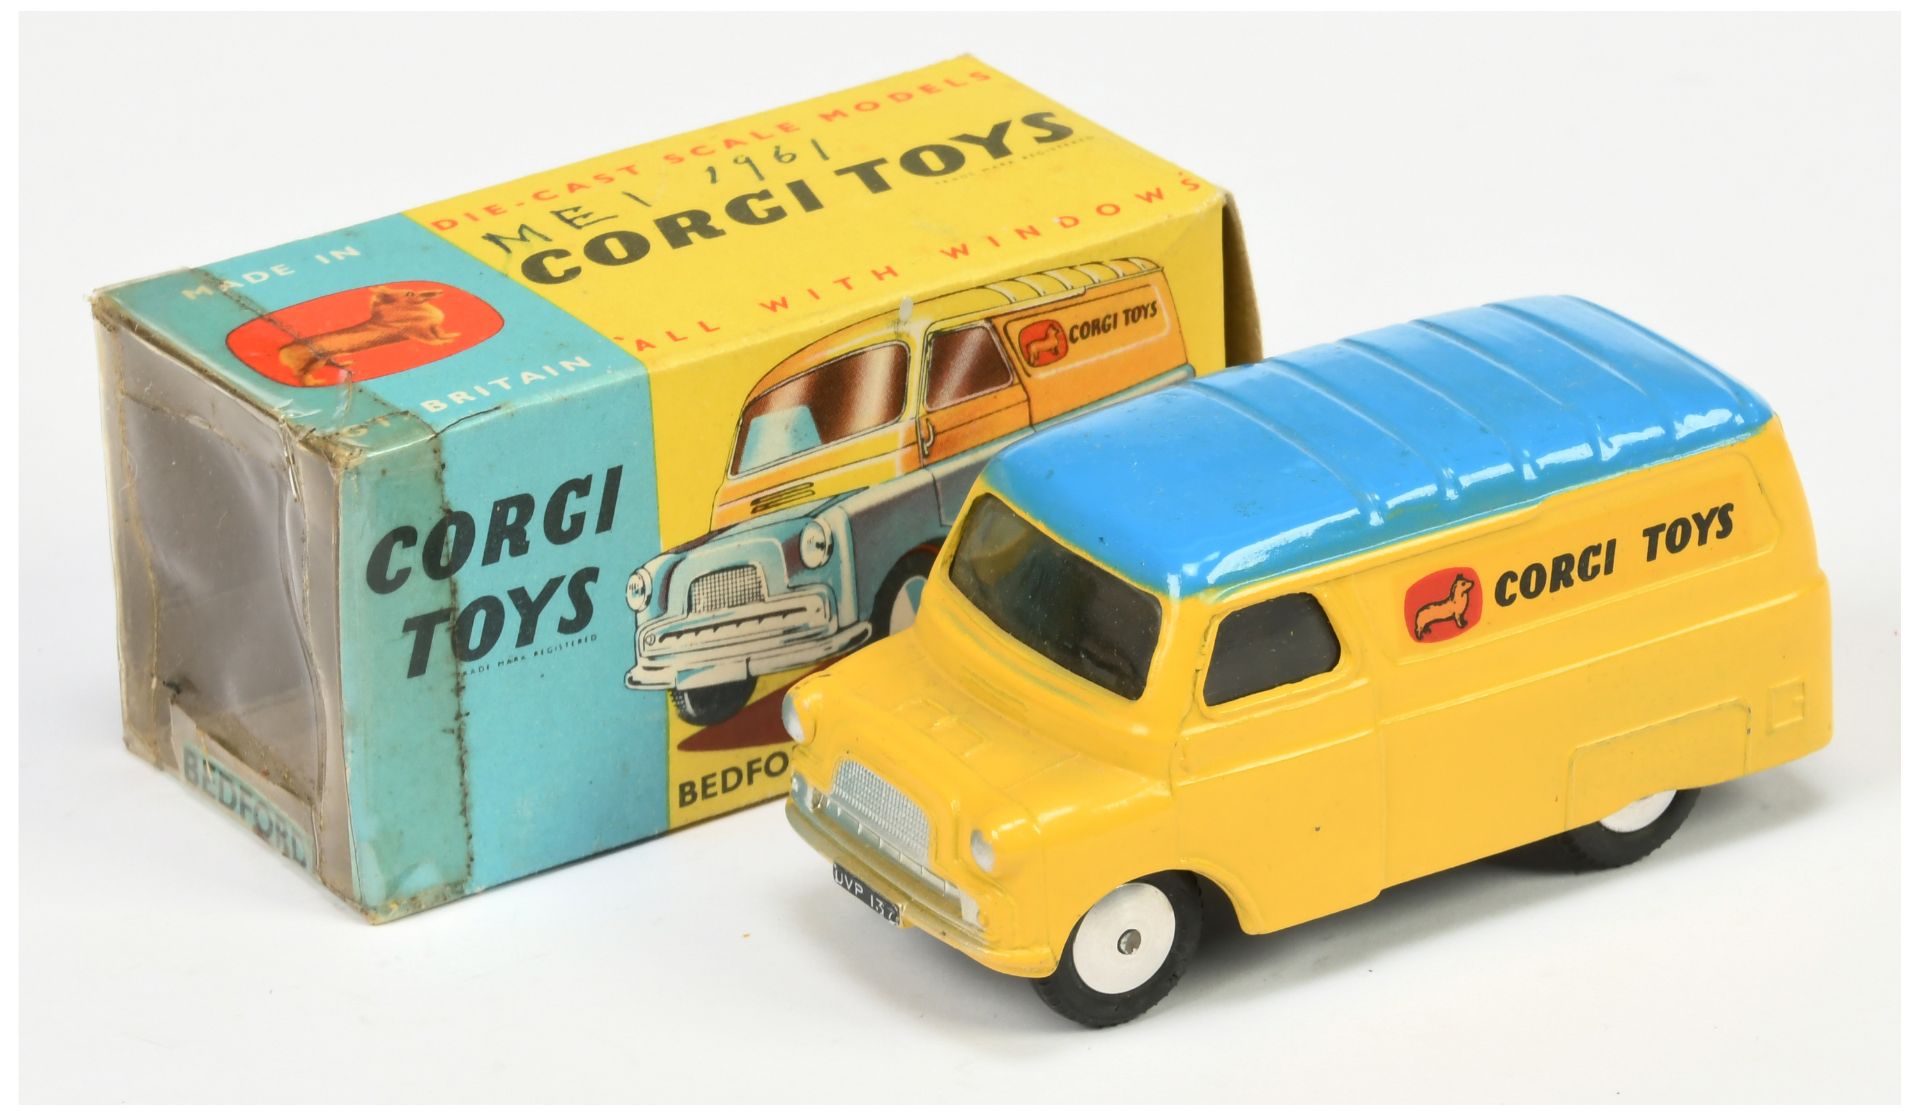 Corgi Toys 422 Bedford "Corgi Toys" Van - Yellow body with mid-blue ribbed roof, silver trim and ...